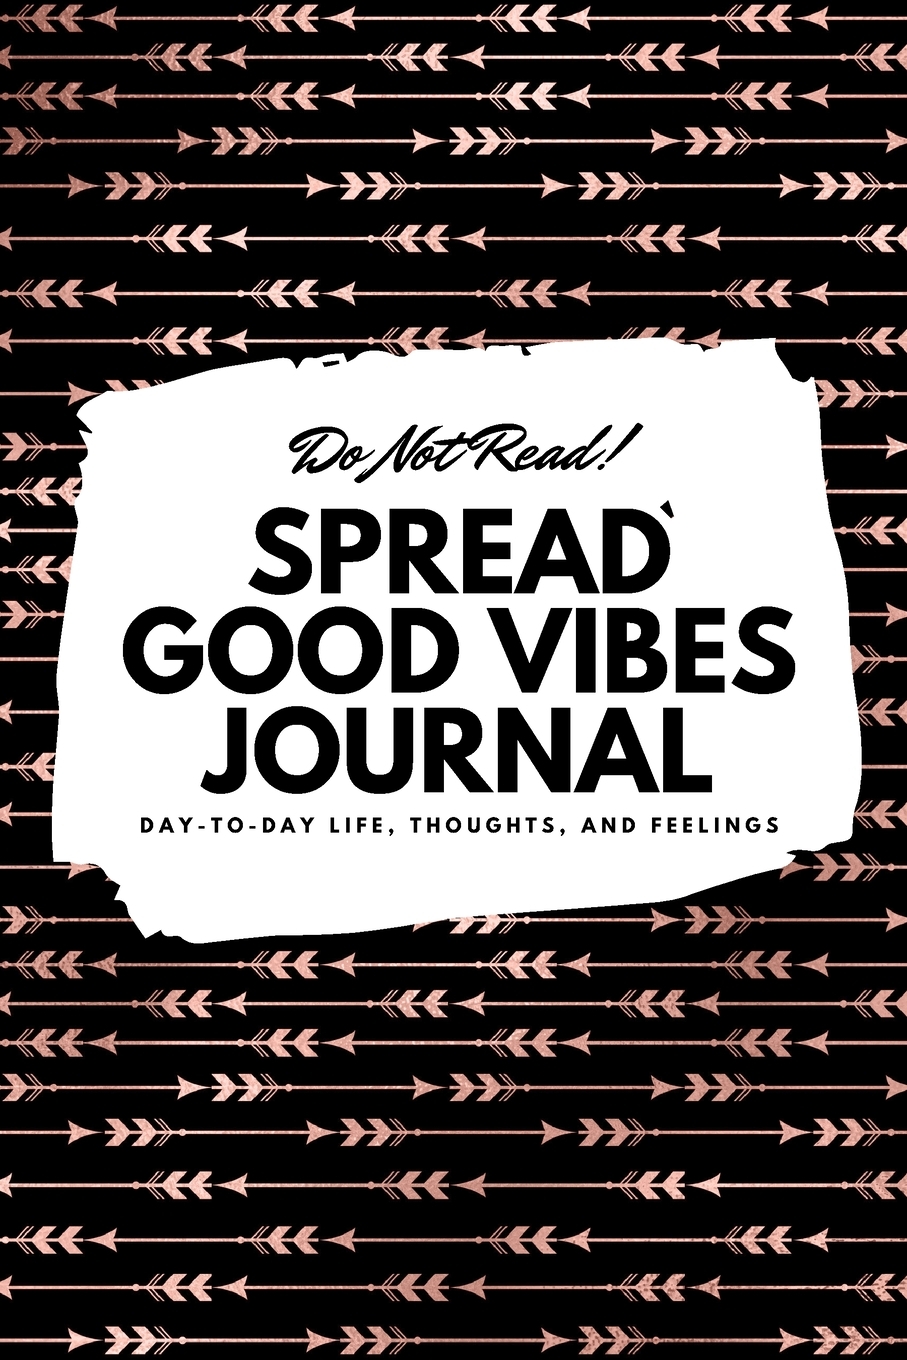 6x9 Blank Journal: Do Not Read! Spread Good Vibes Journal - Small Blank Journal - 6x9 Blank Journal (Softcover Journal / Notebook / Sketchbook / Diary) (Series #5) (Paperback) - image 1 of 1